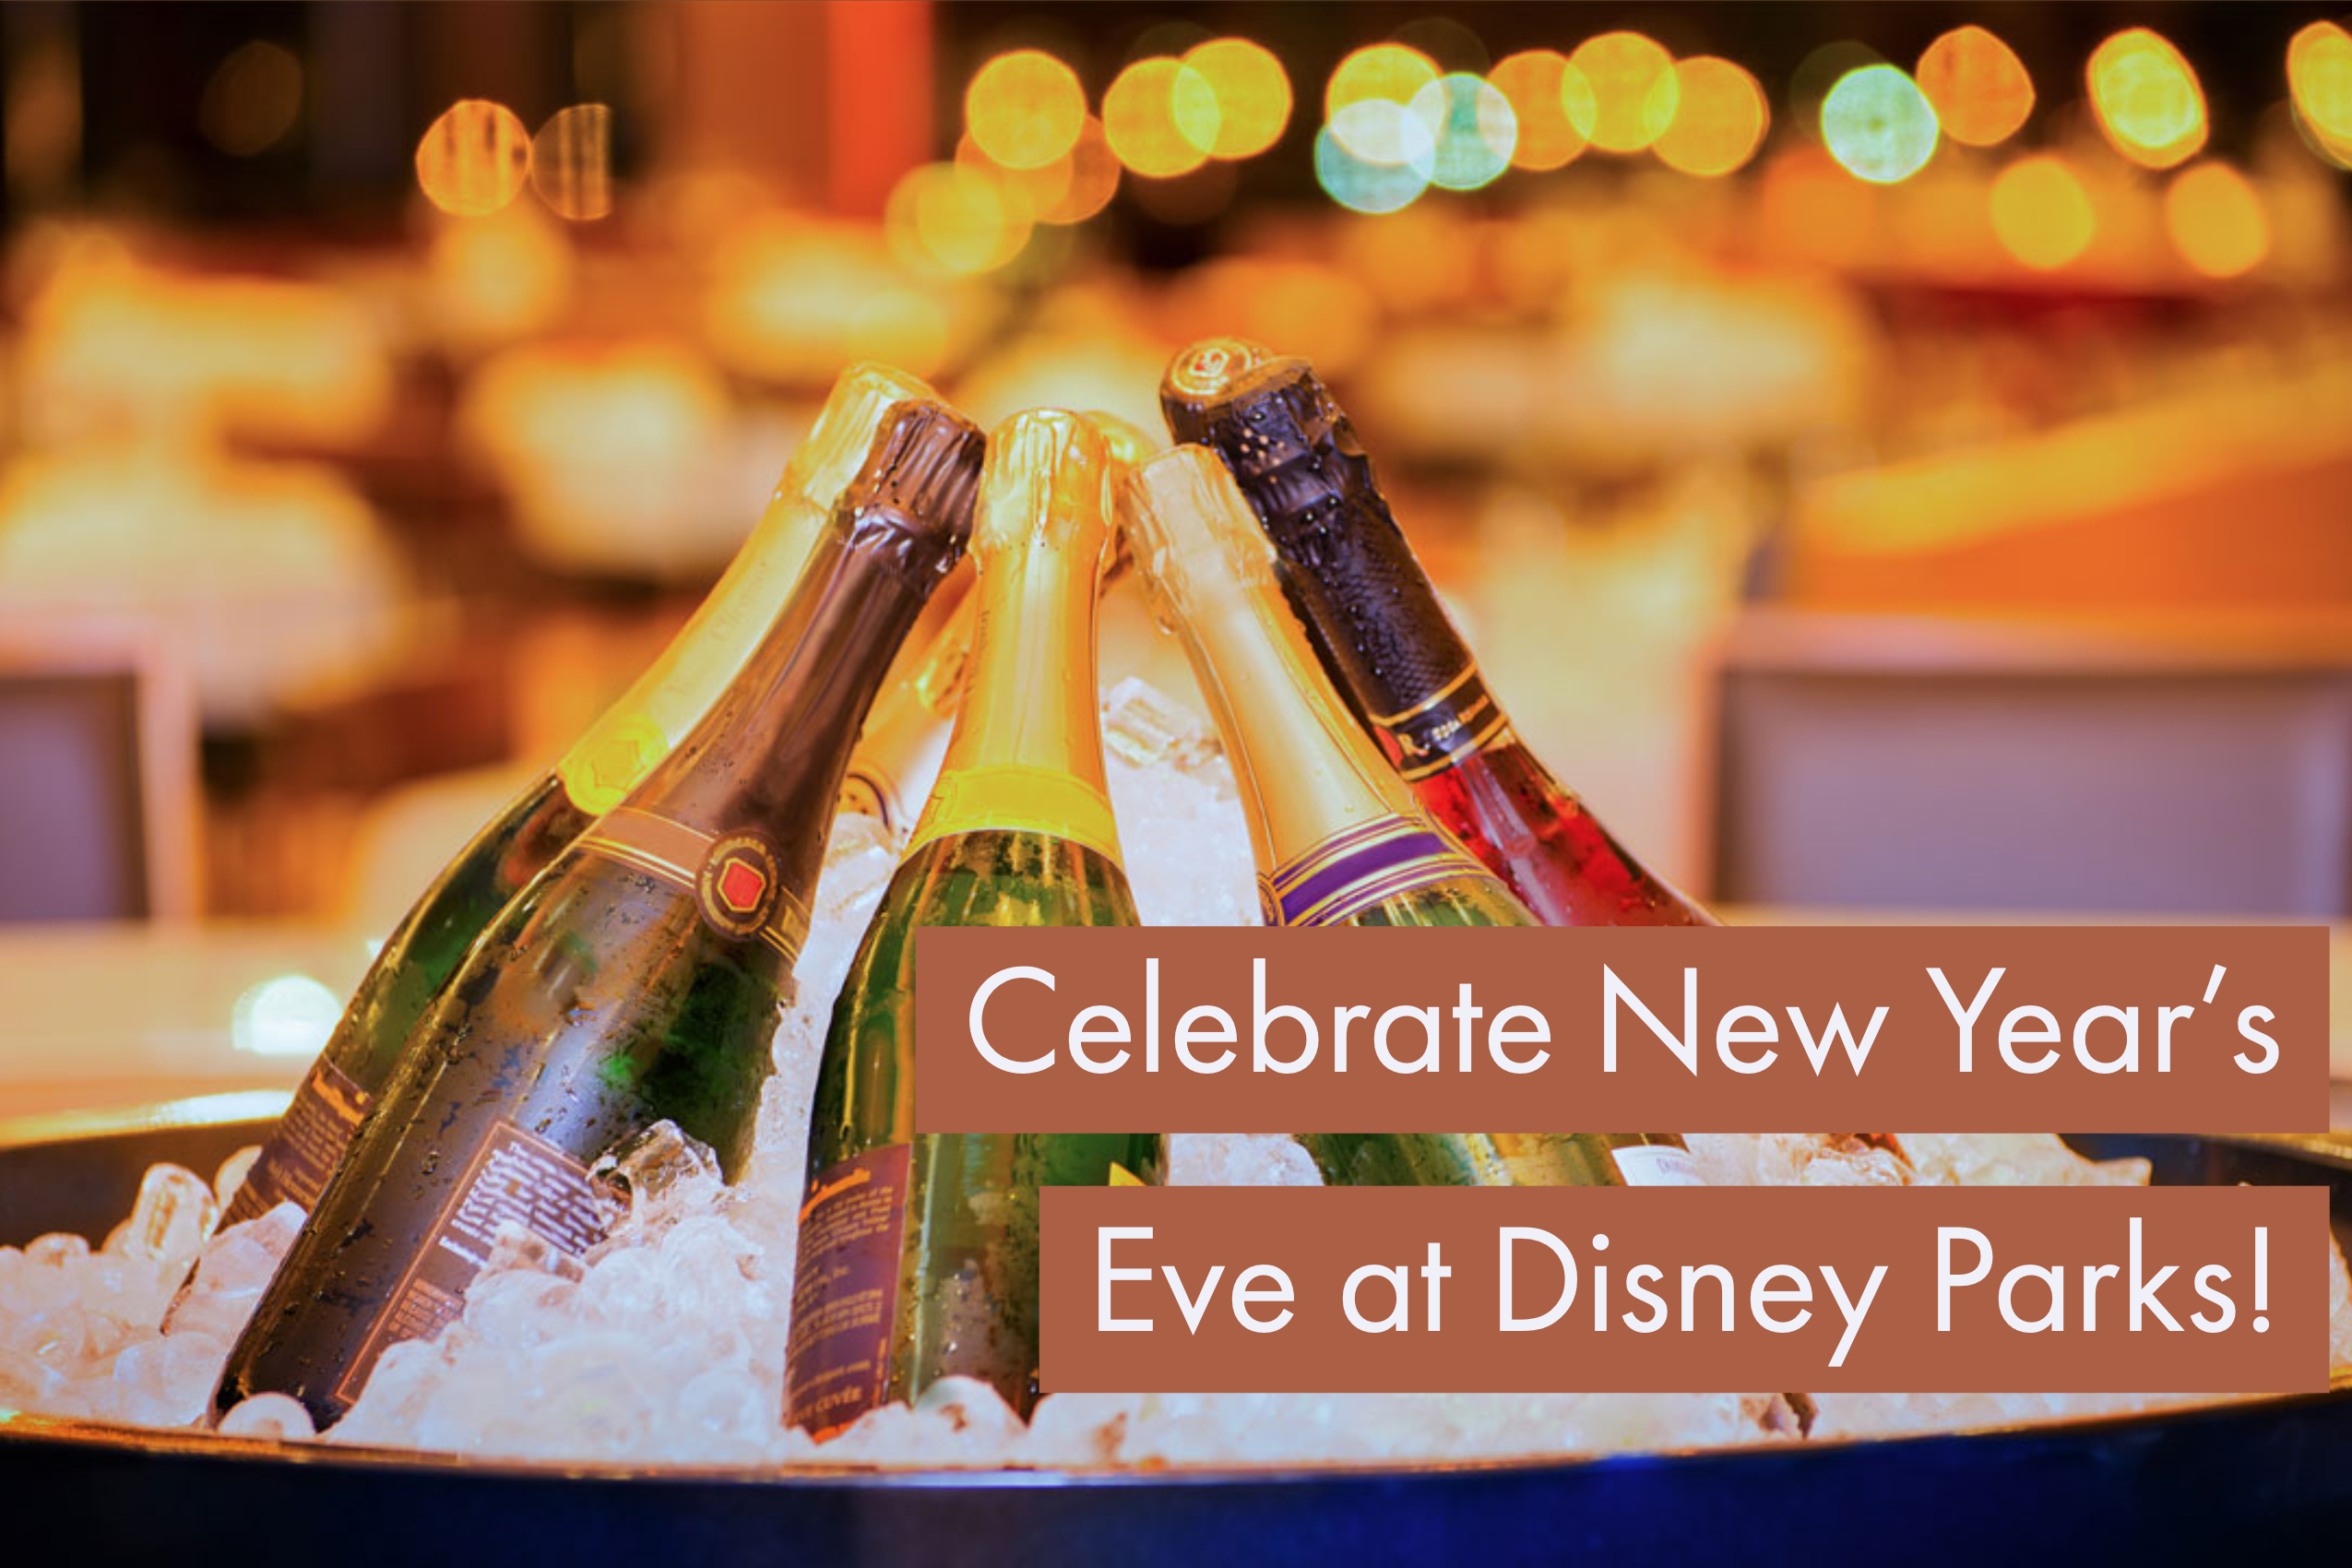 Make New Year’s Eve Even More Magical By Celebrating at Disney Parks